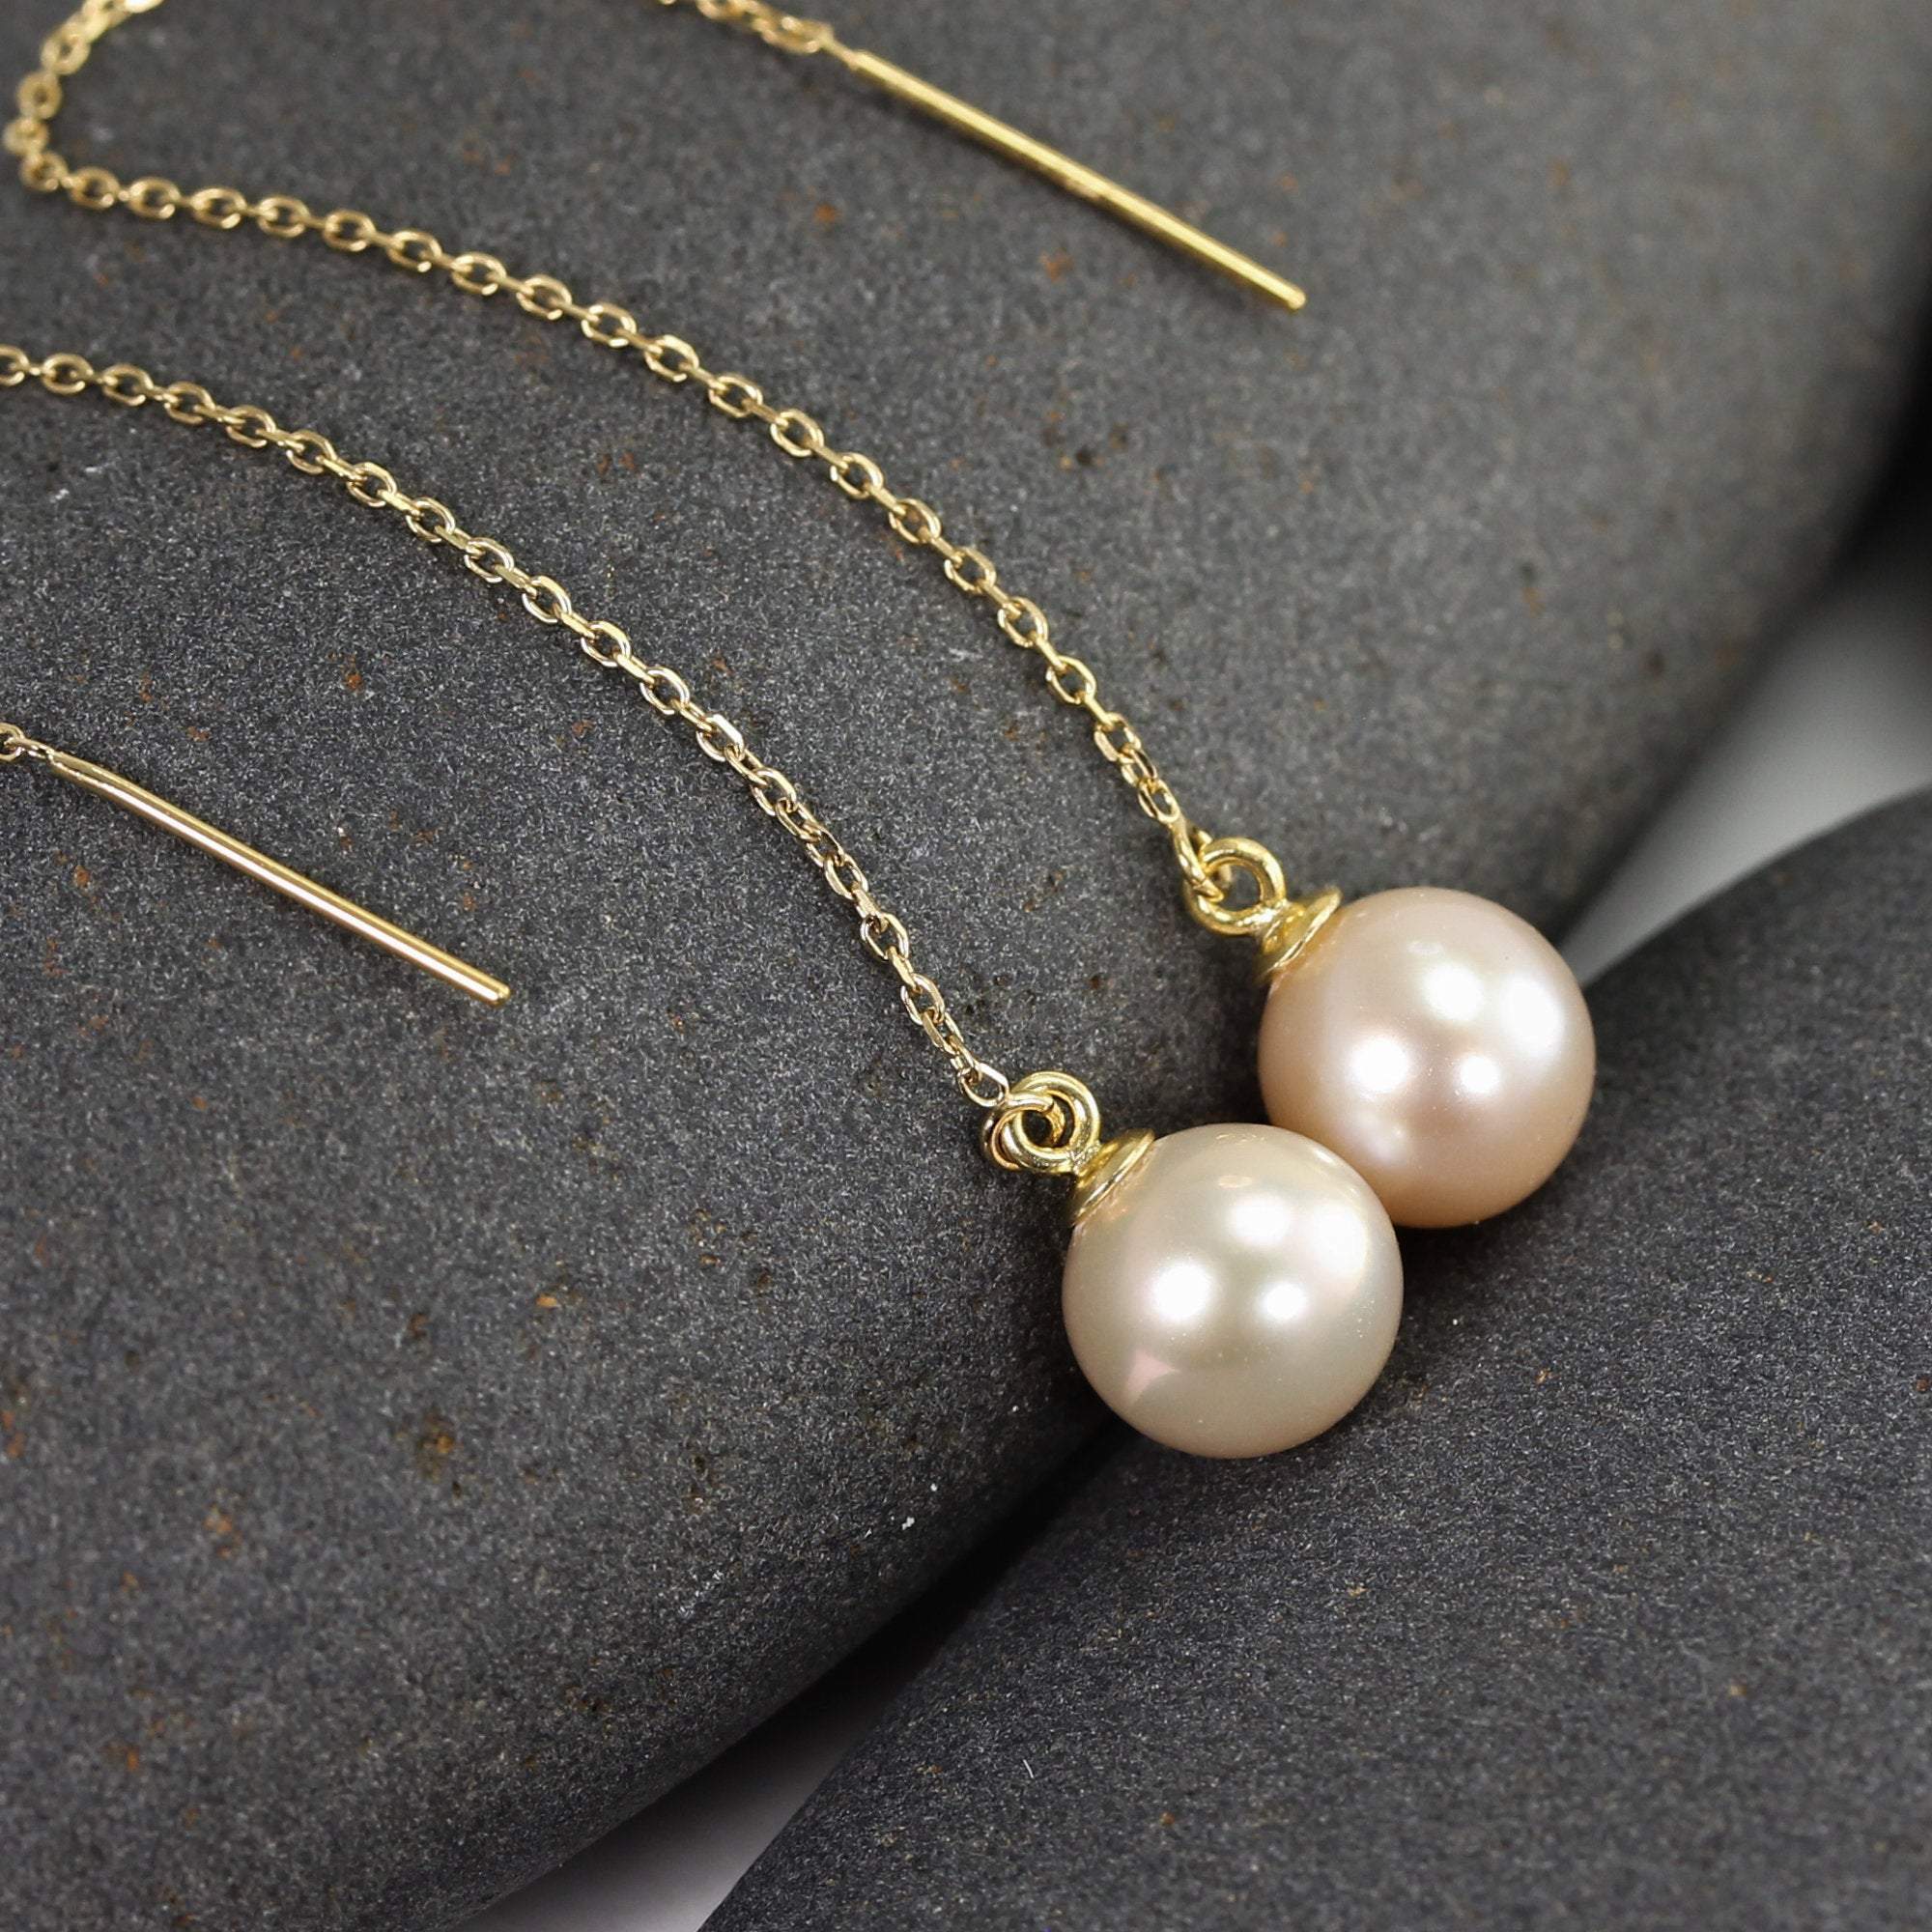 Large Pearl Threaders in 14K with Genuine Freshwater Pearls